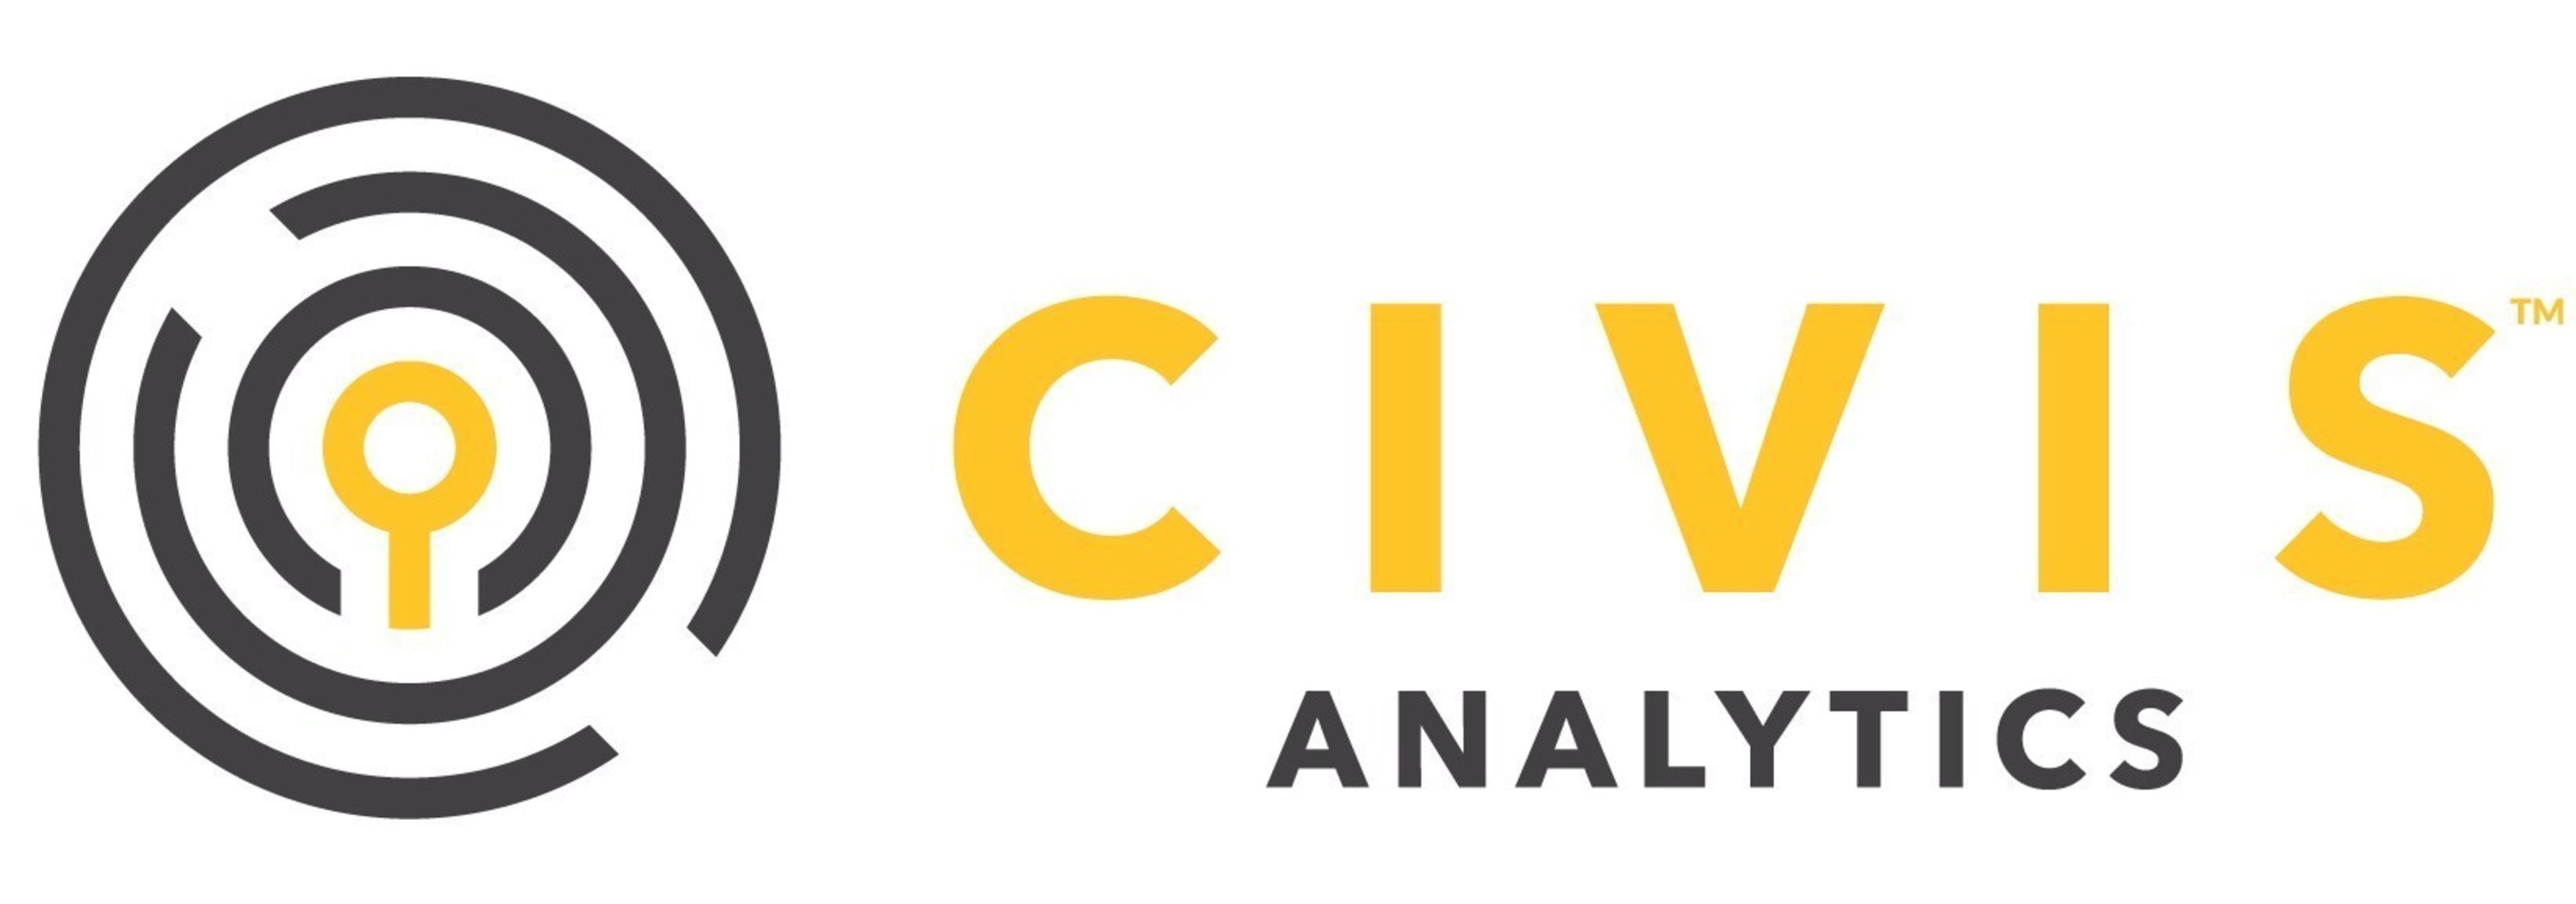 Civis Analytics makes data-driven strategy possible for all organizations. Founded in 2013, Civis Analytics was born out of President Obama's reelection campaign in 2012. Today, Civis assists a fast-growing and diverse group of both public and private sector clients. Its data analytics products and services are deployed with corporations in industries including retail, energy, entertainment, healthcare, as well as with major non-profits, political campaigns, and advocacy groups.